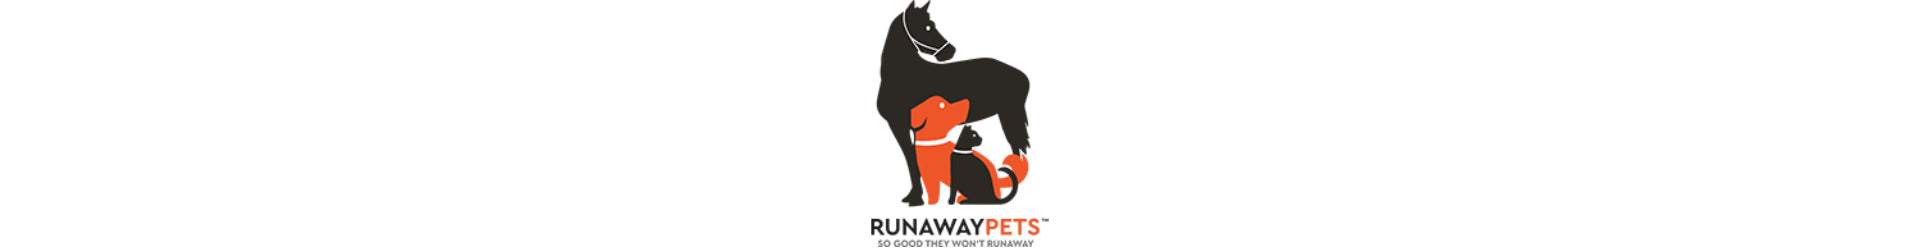 Run away pets supplements - Happy Town Pets Singapore